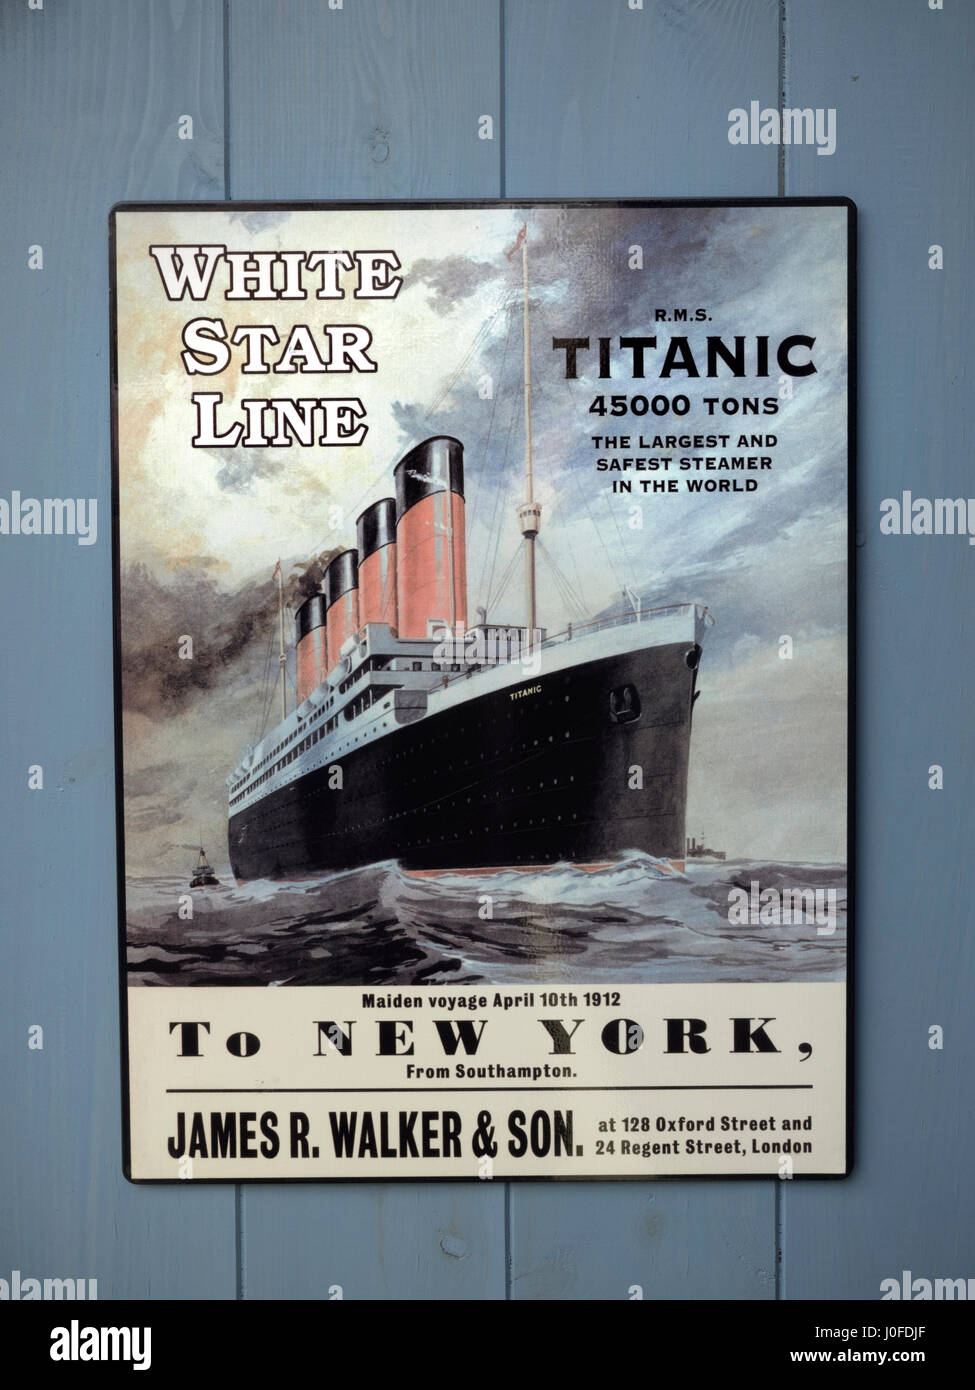 TITANIC Replica Poster advertising the first sailing of Titanic to New York April 10th 1912 Titanic tragically sank en-route on April 15th 1912 Stock Photo